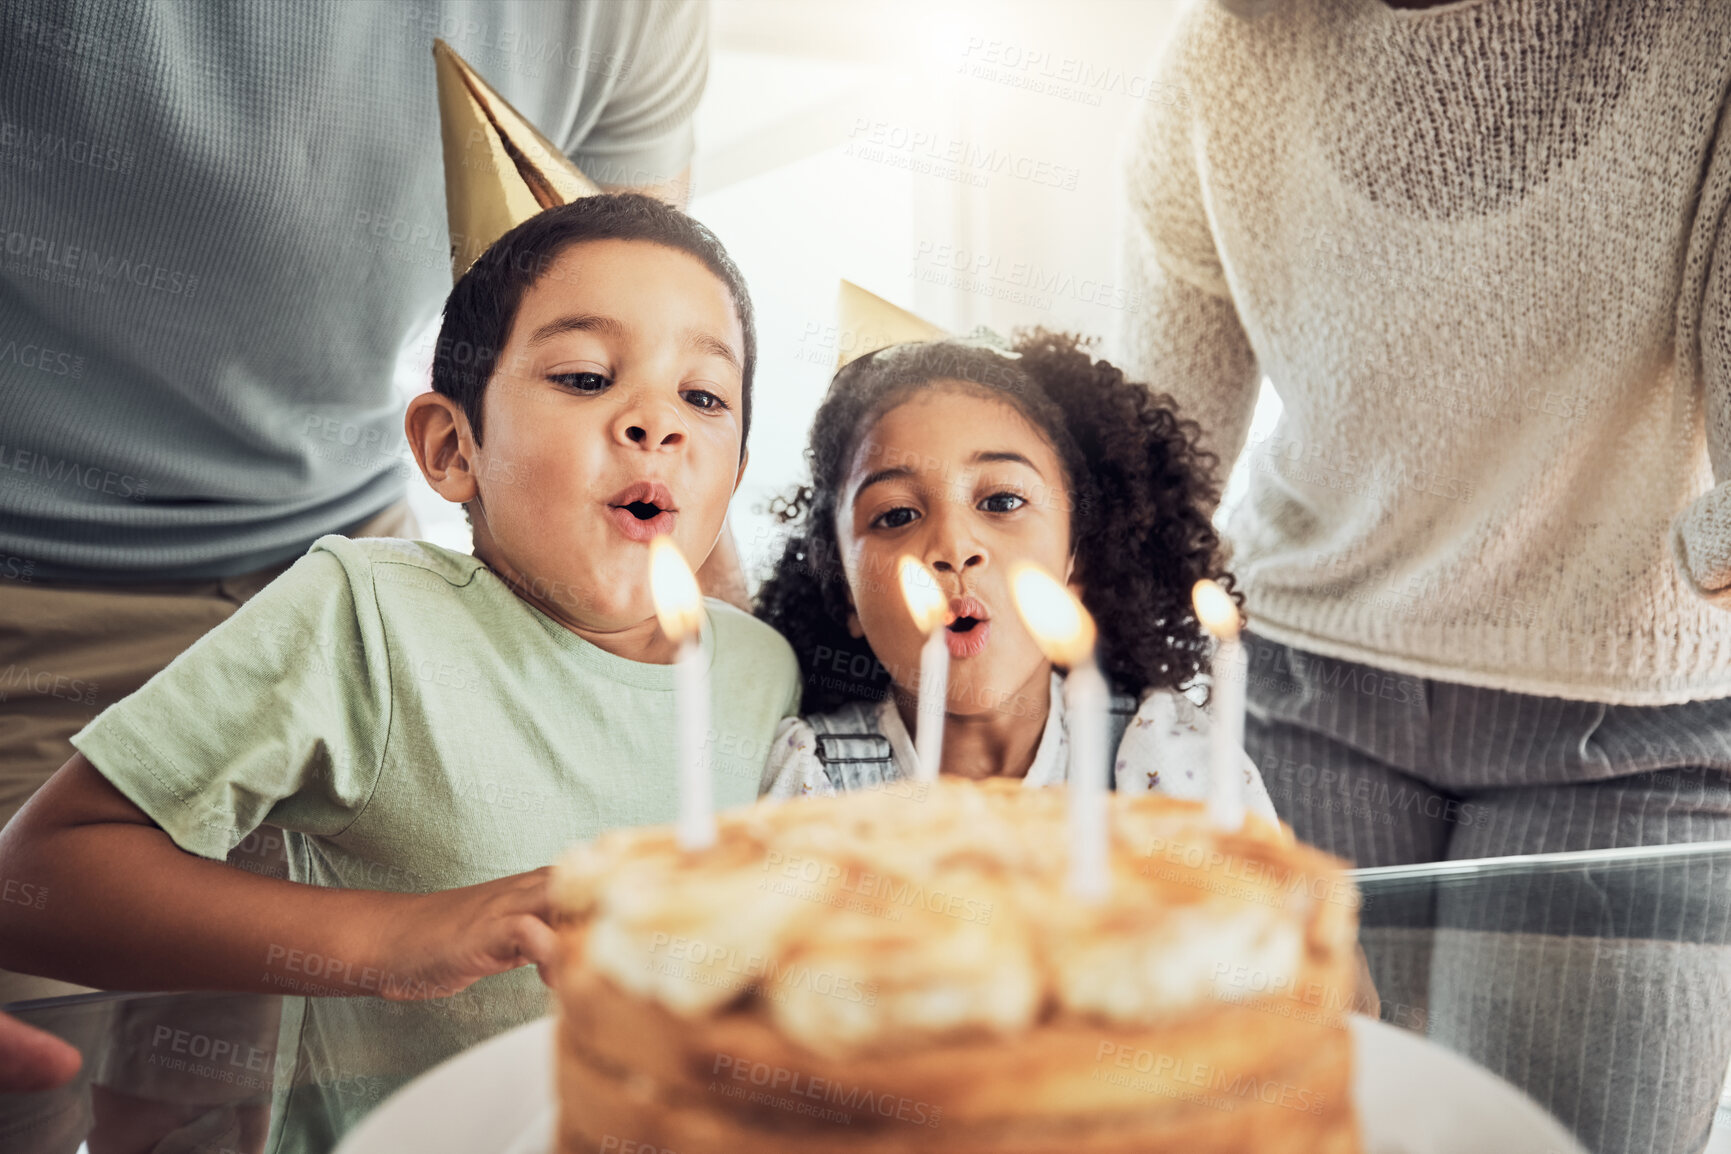 Buy stock photo Children, birthday cake and blowing candles in celebration event, fun party or Brazilian family social reunion with parents. Boy, girl or kids with sweet dessert food in house or home with mom or dad